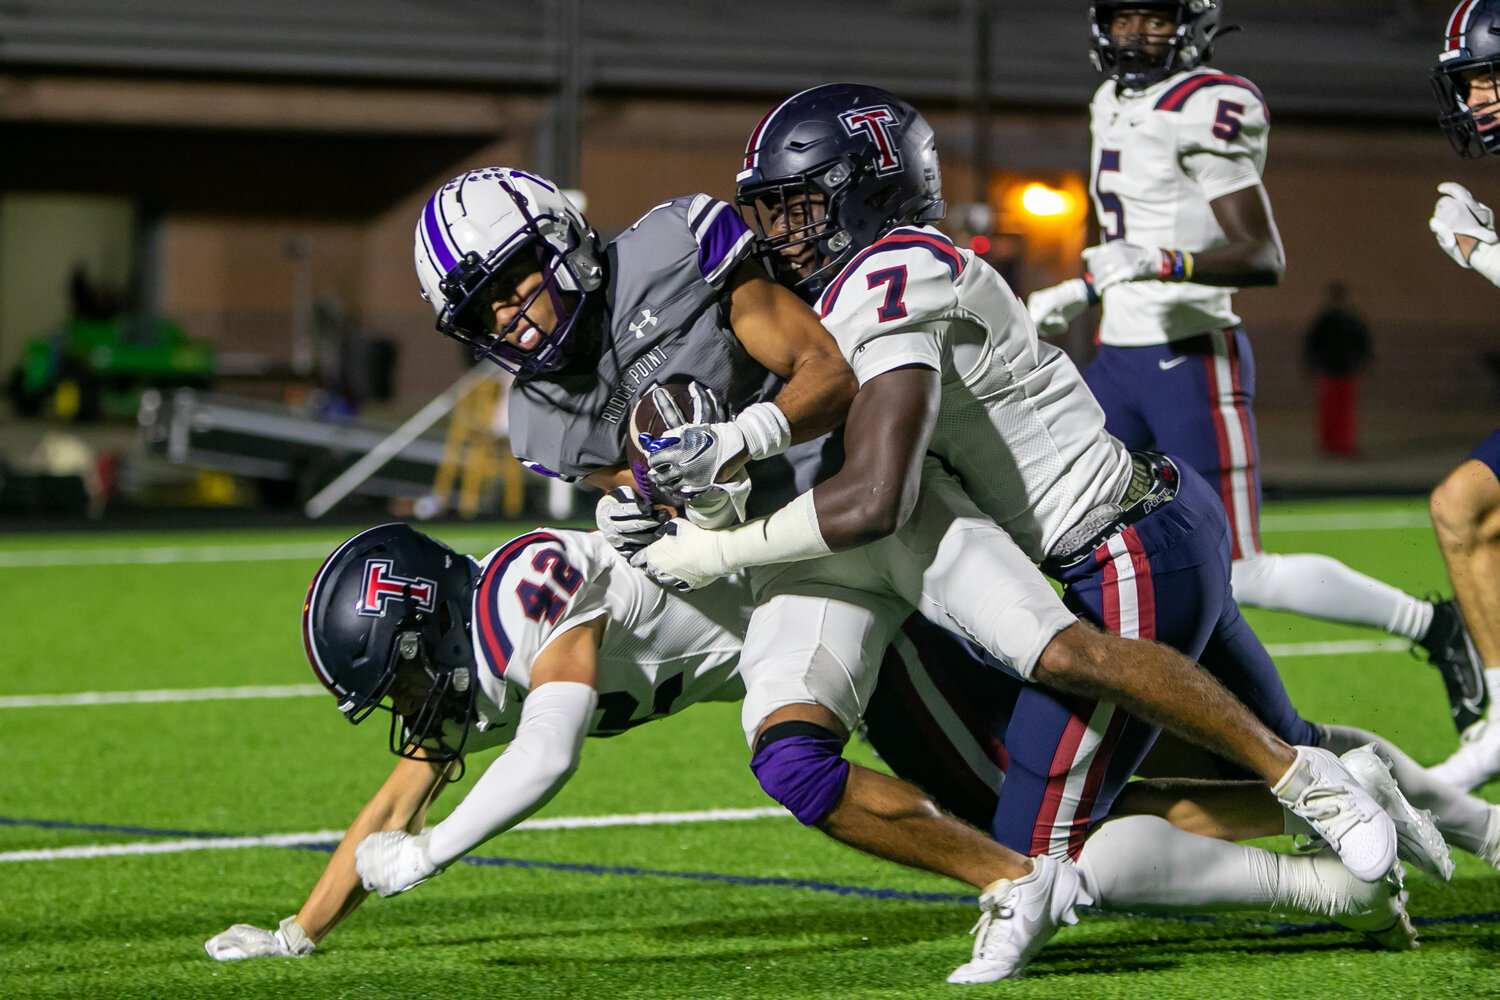 Rotimi Olayinka tackles a ball carrier during Friday's game between Tompkins and Ridge Point at Hall Stadium.